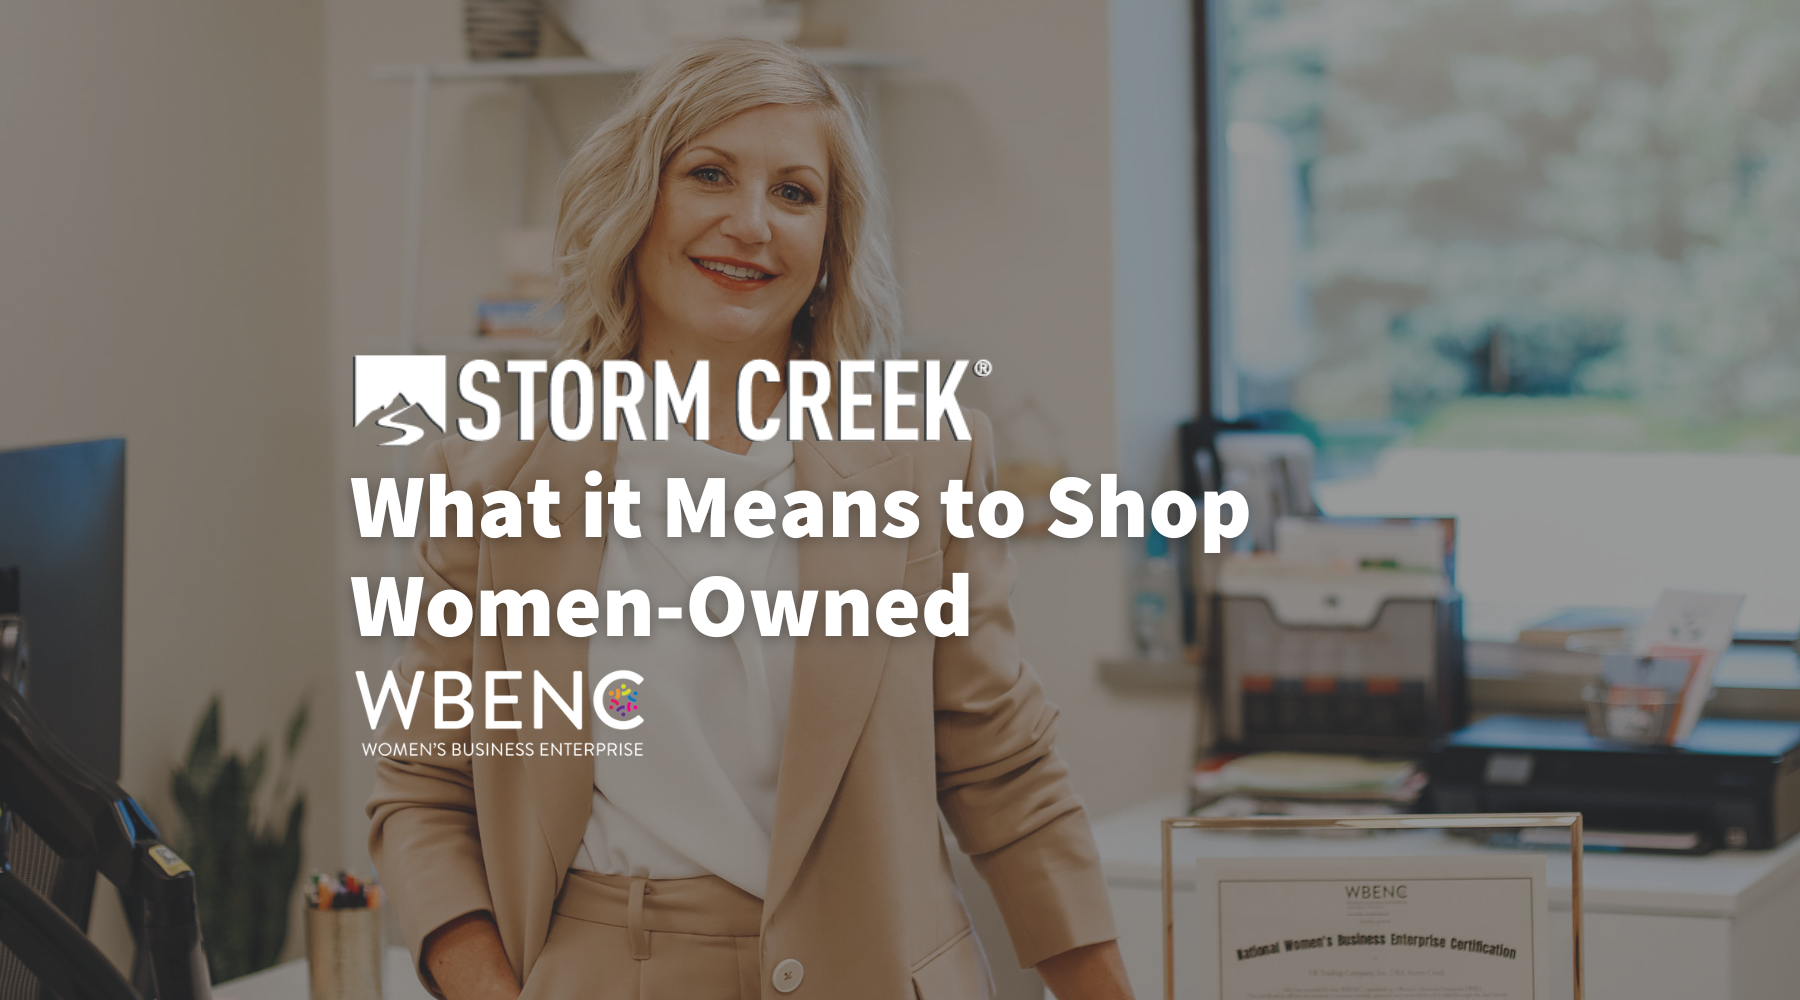 What Does It Mean to Shop Women-Owned?